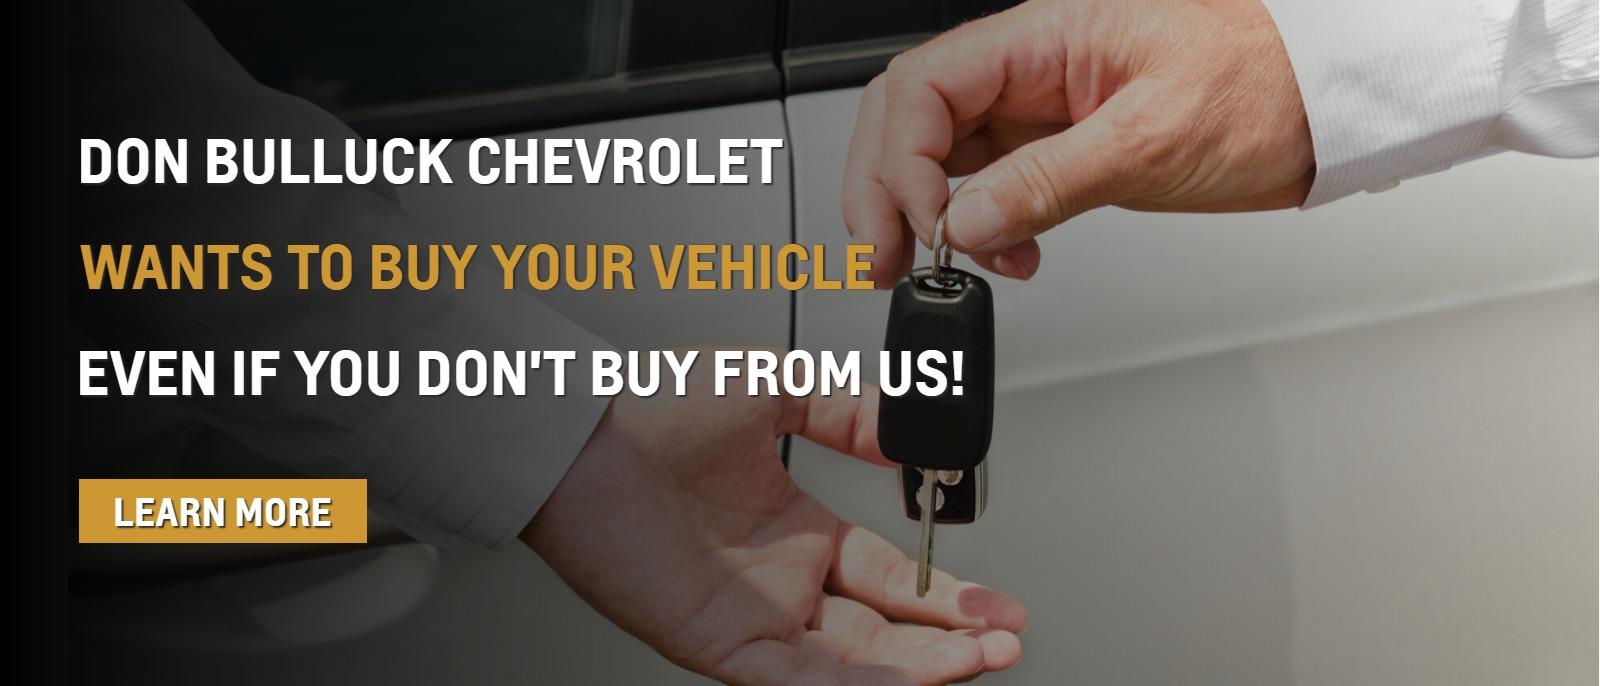 DON BULLUCK CHEVROLET WANTS TO BUY YOUR VEHICLE  even if you don't buy from us!